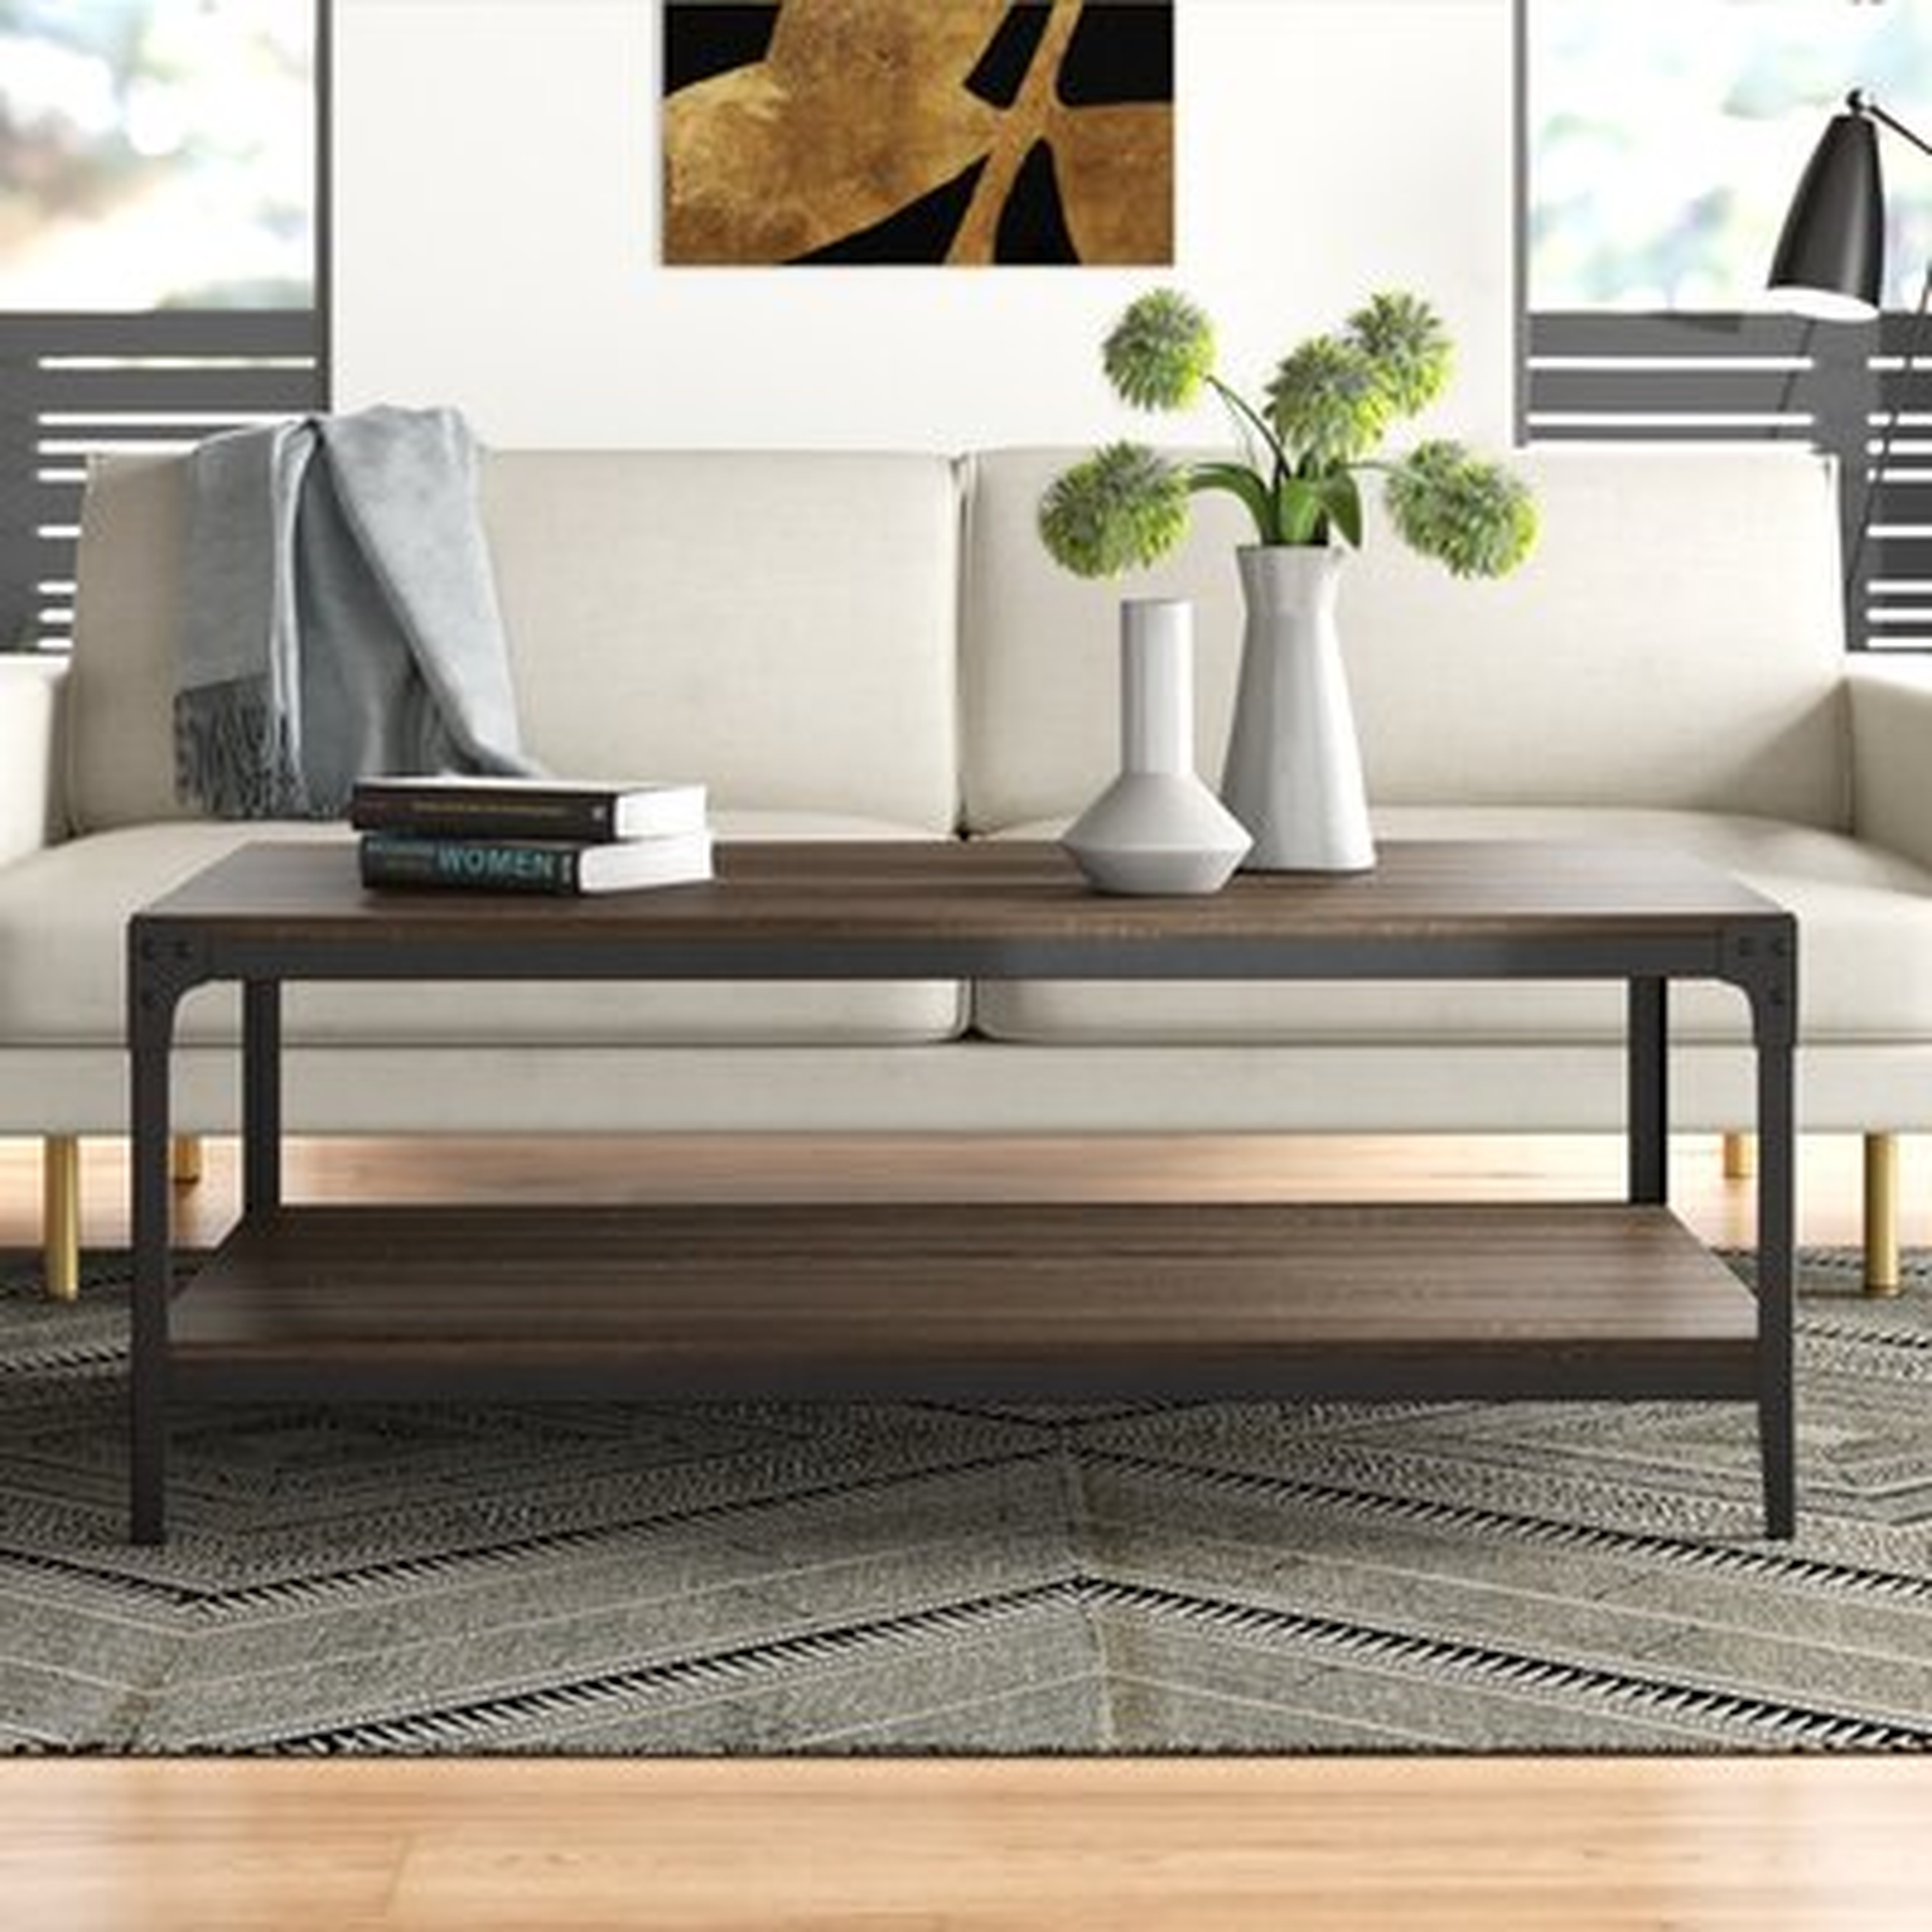 Cainsville 4 Legs Coffee Table with Storage - Wayfair